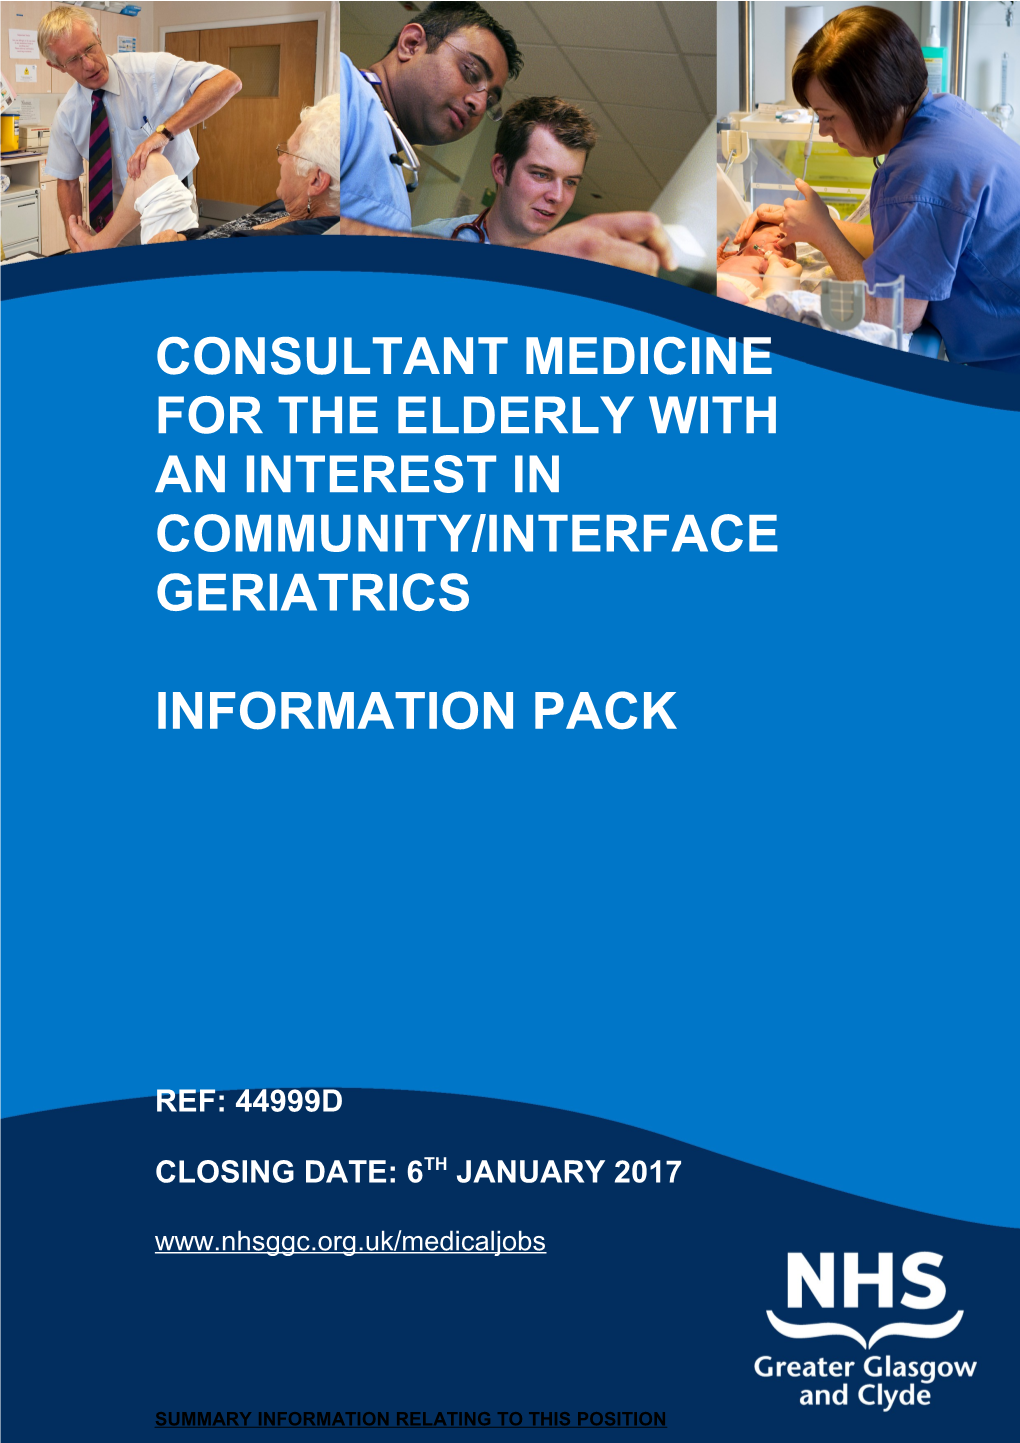 Consultant Medicine for the Elderly with an Interest in Community/Interface Geriatrics